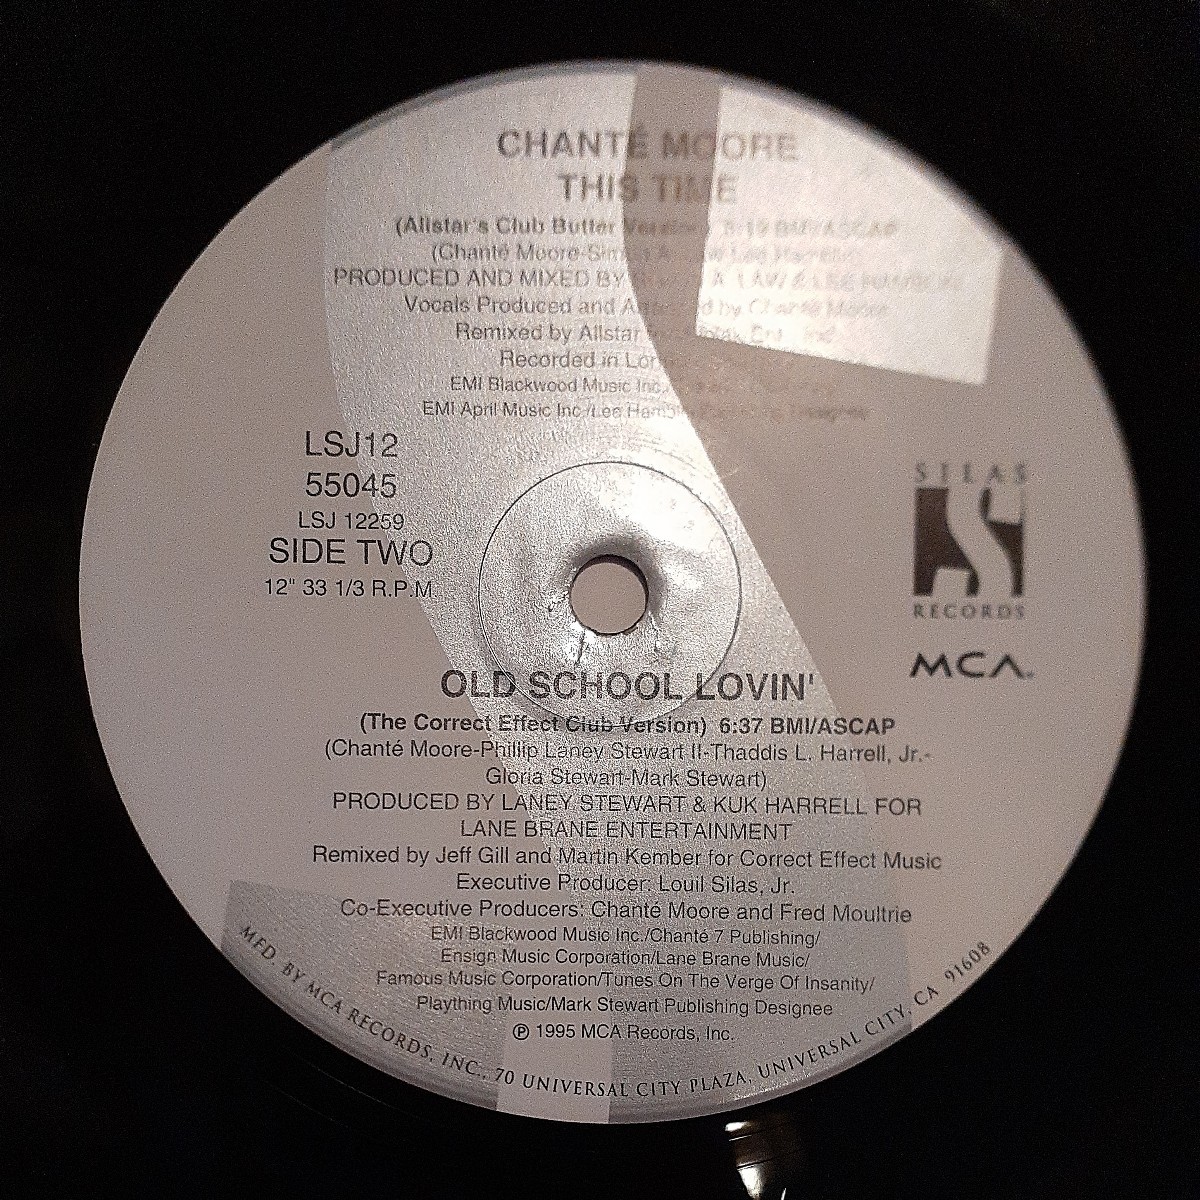 CHANTE MOORE / THIS TIME (THE BOMB MIX) /FRANKIE KNUCKLES,DEF MIX,BODY & SOUL,DEEP HOUSE